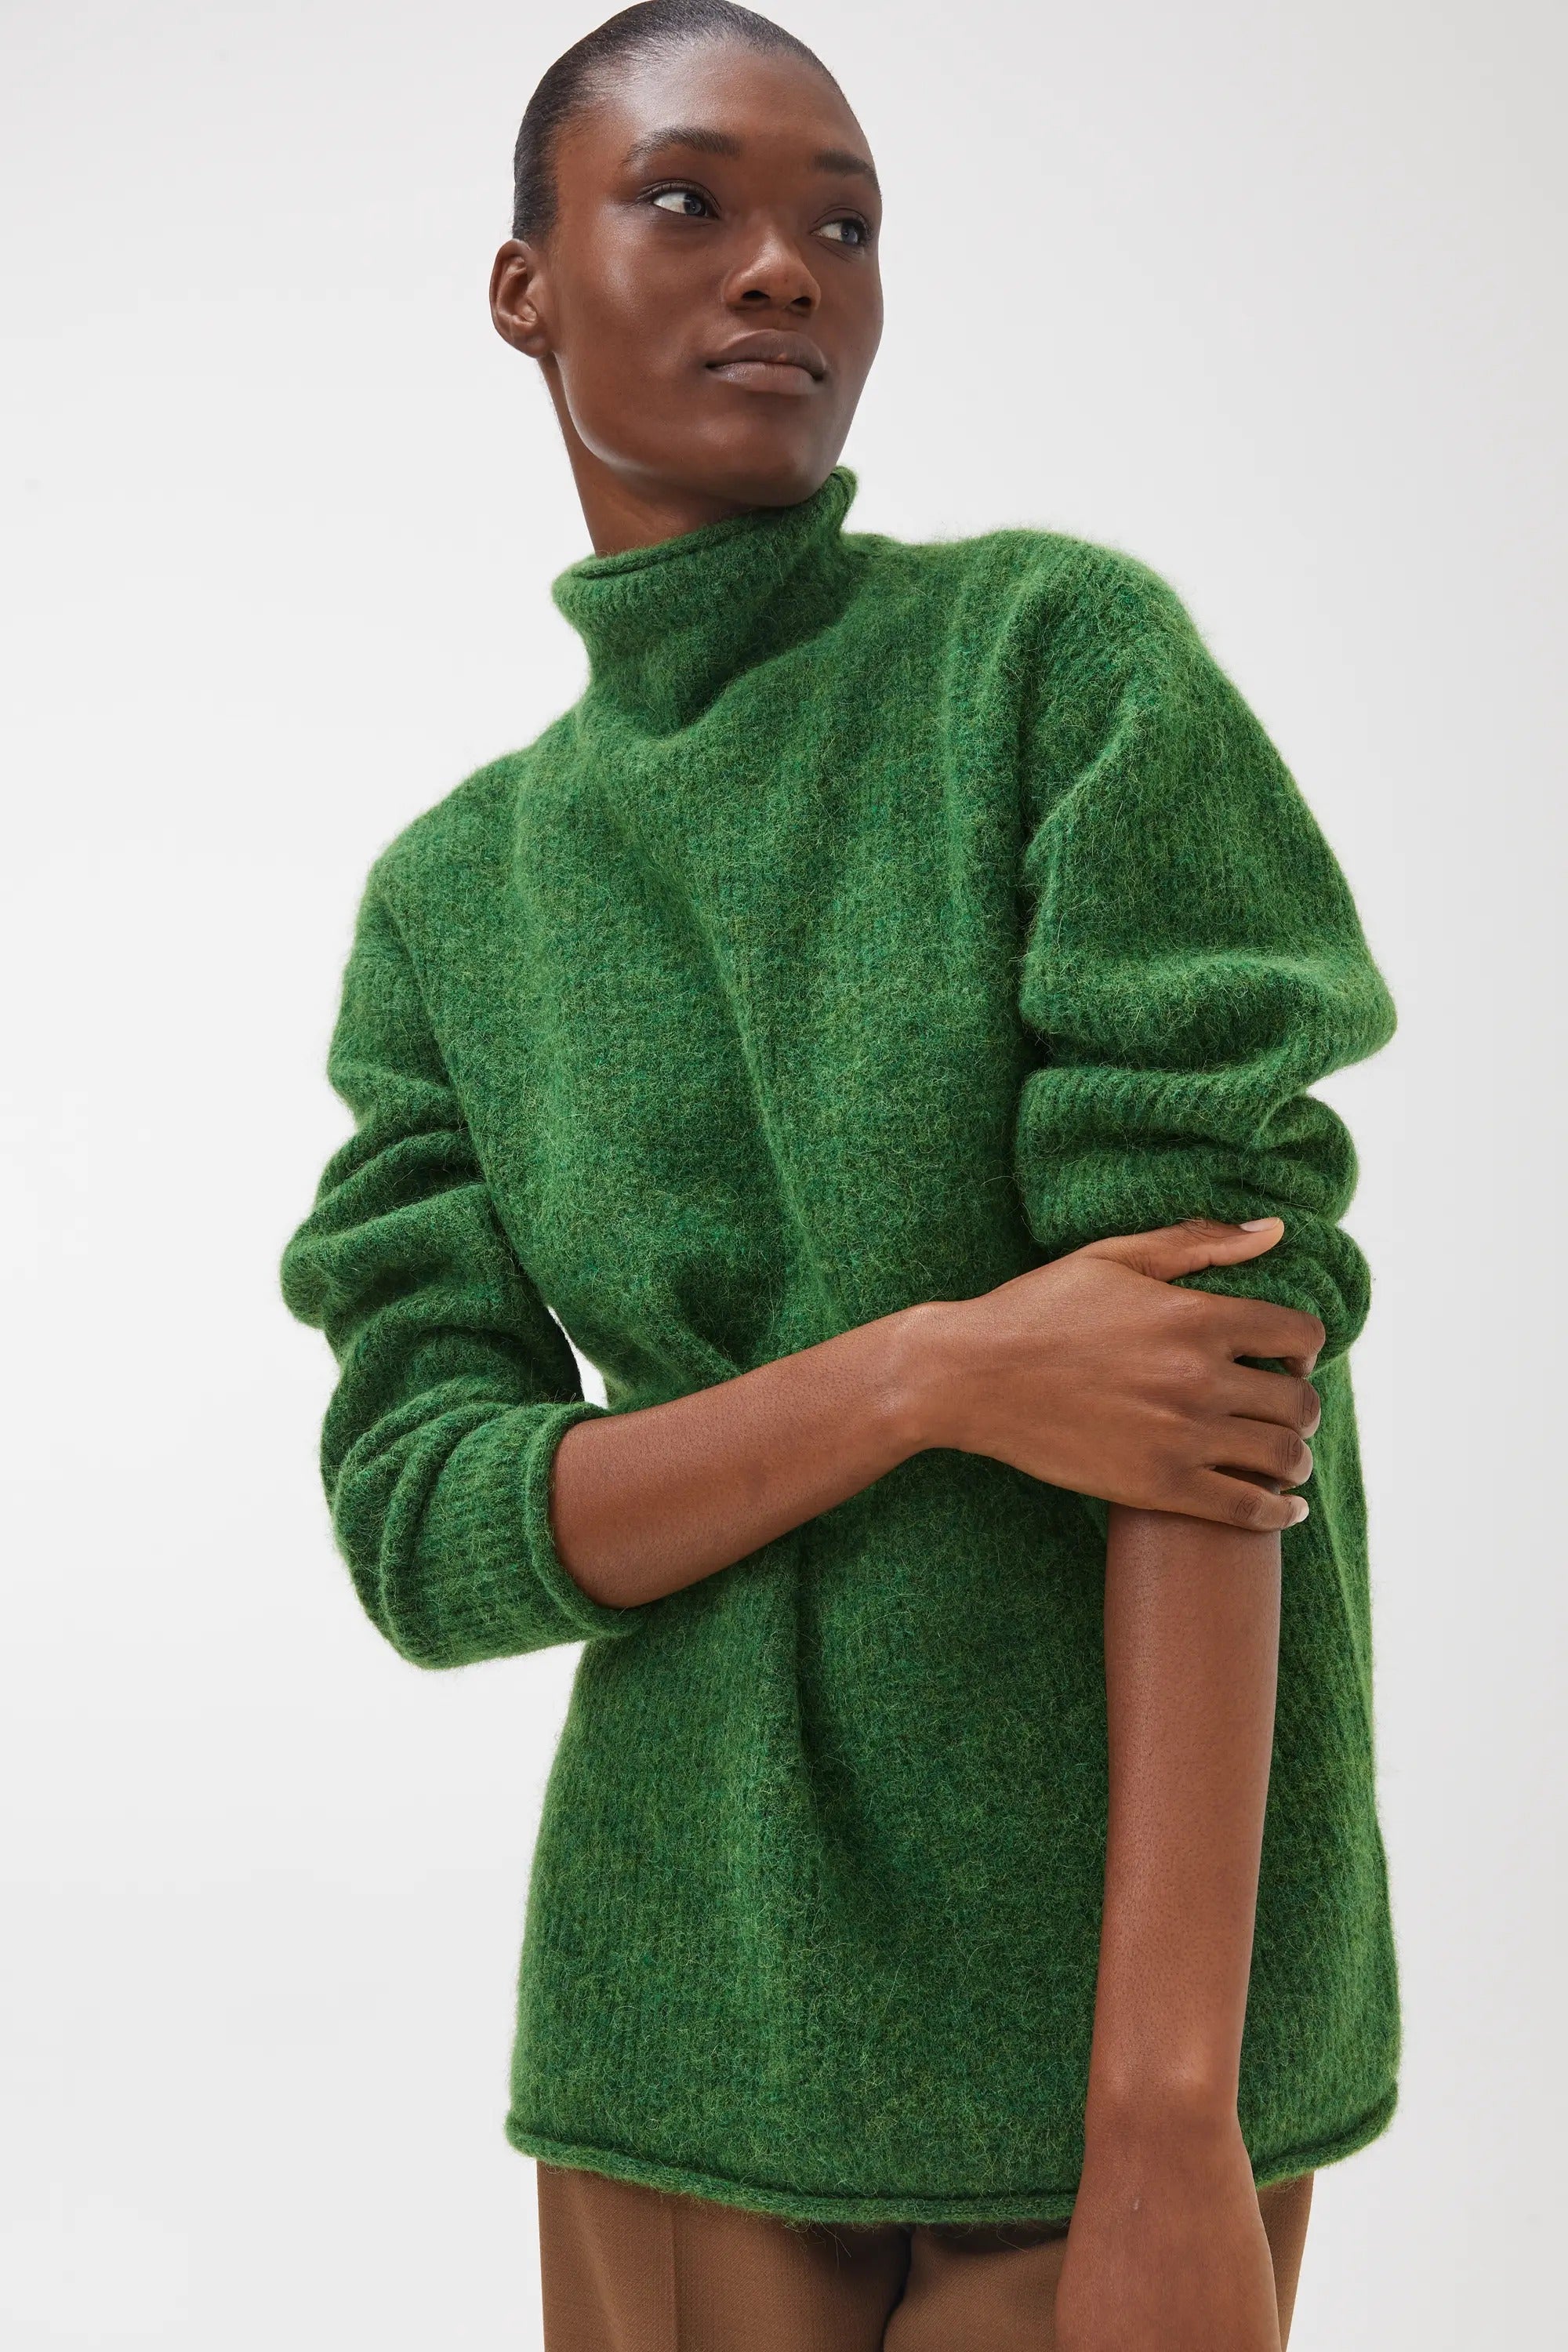 Arket + The 5 Knitwear Trends Ruling This Autumn